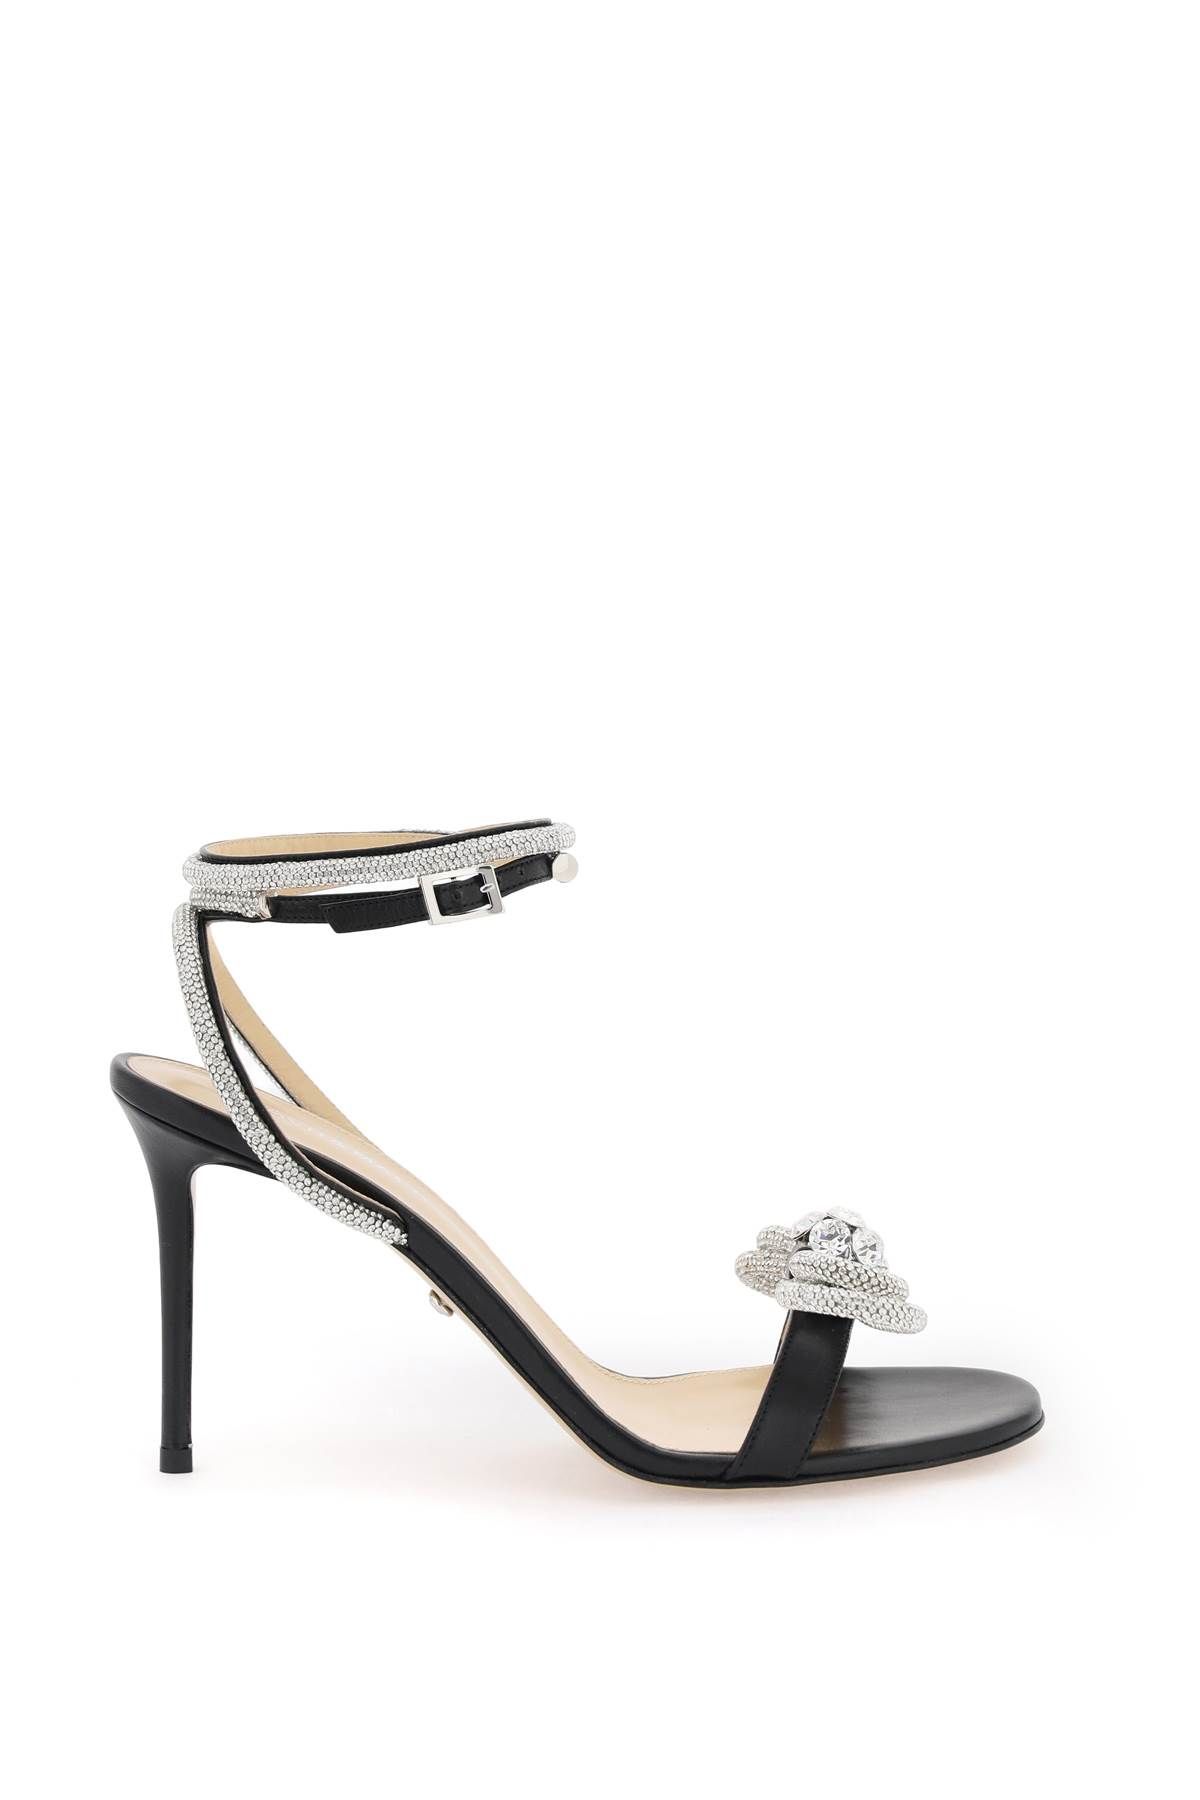 Shop Mach & Mach Leather Sandals With Crystals In Black